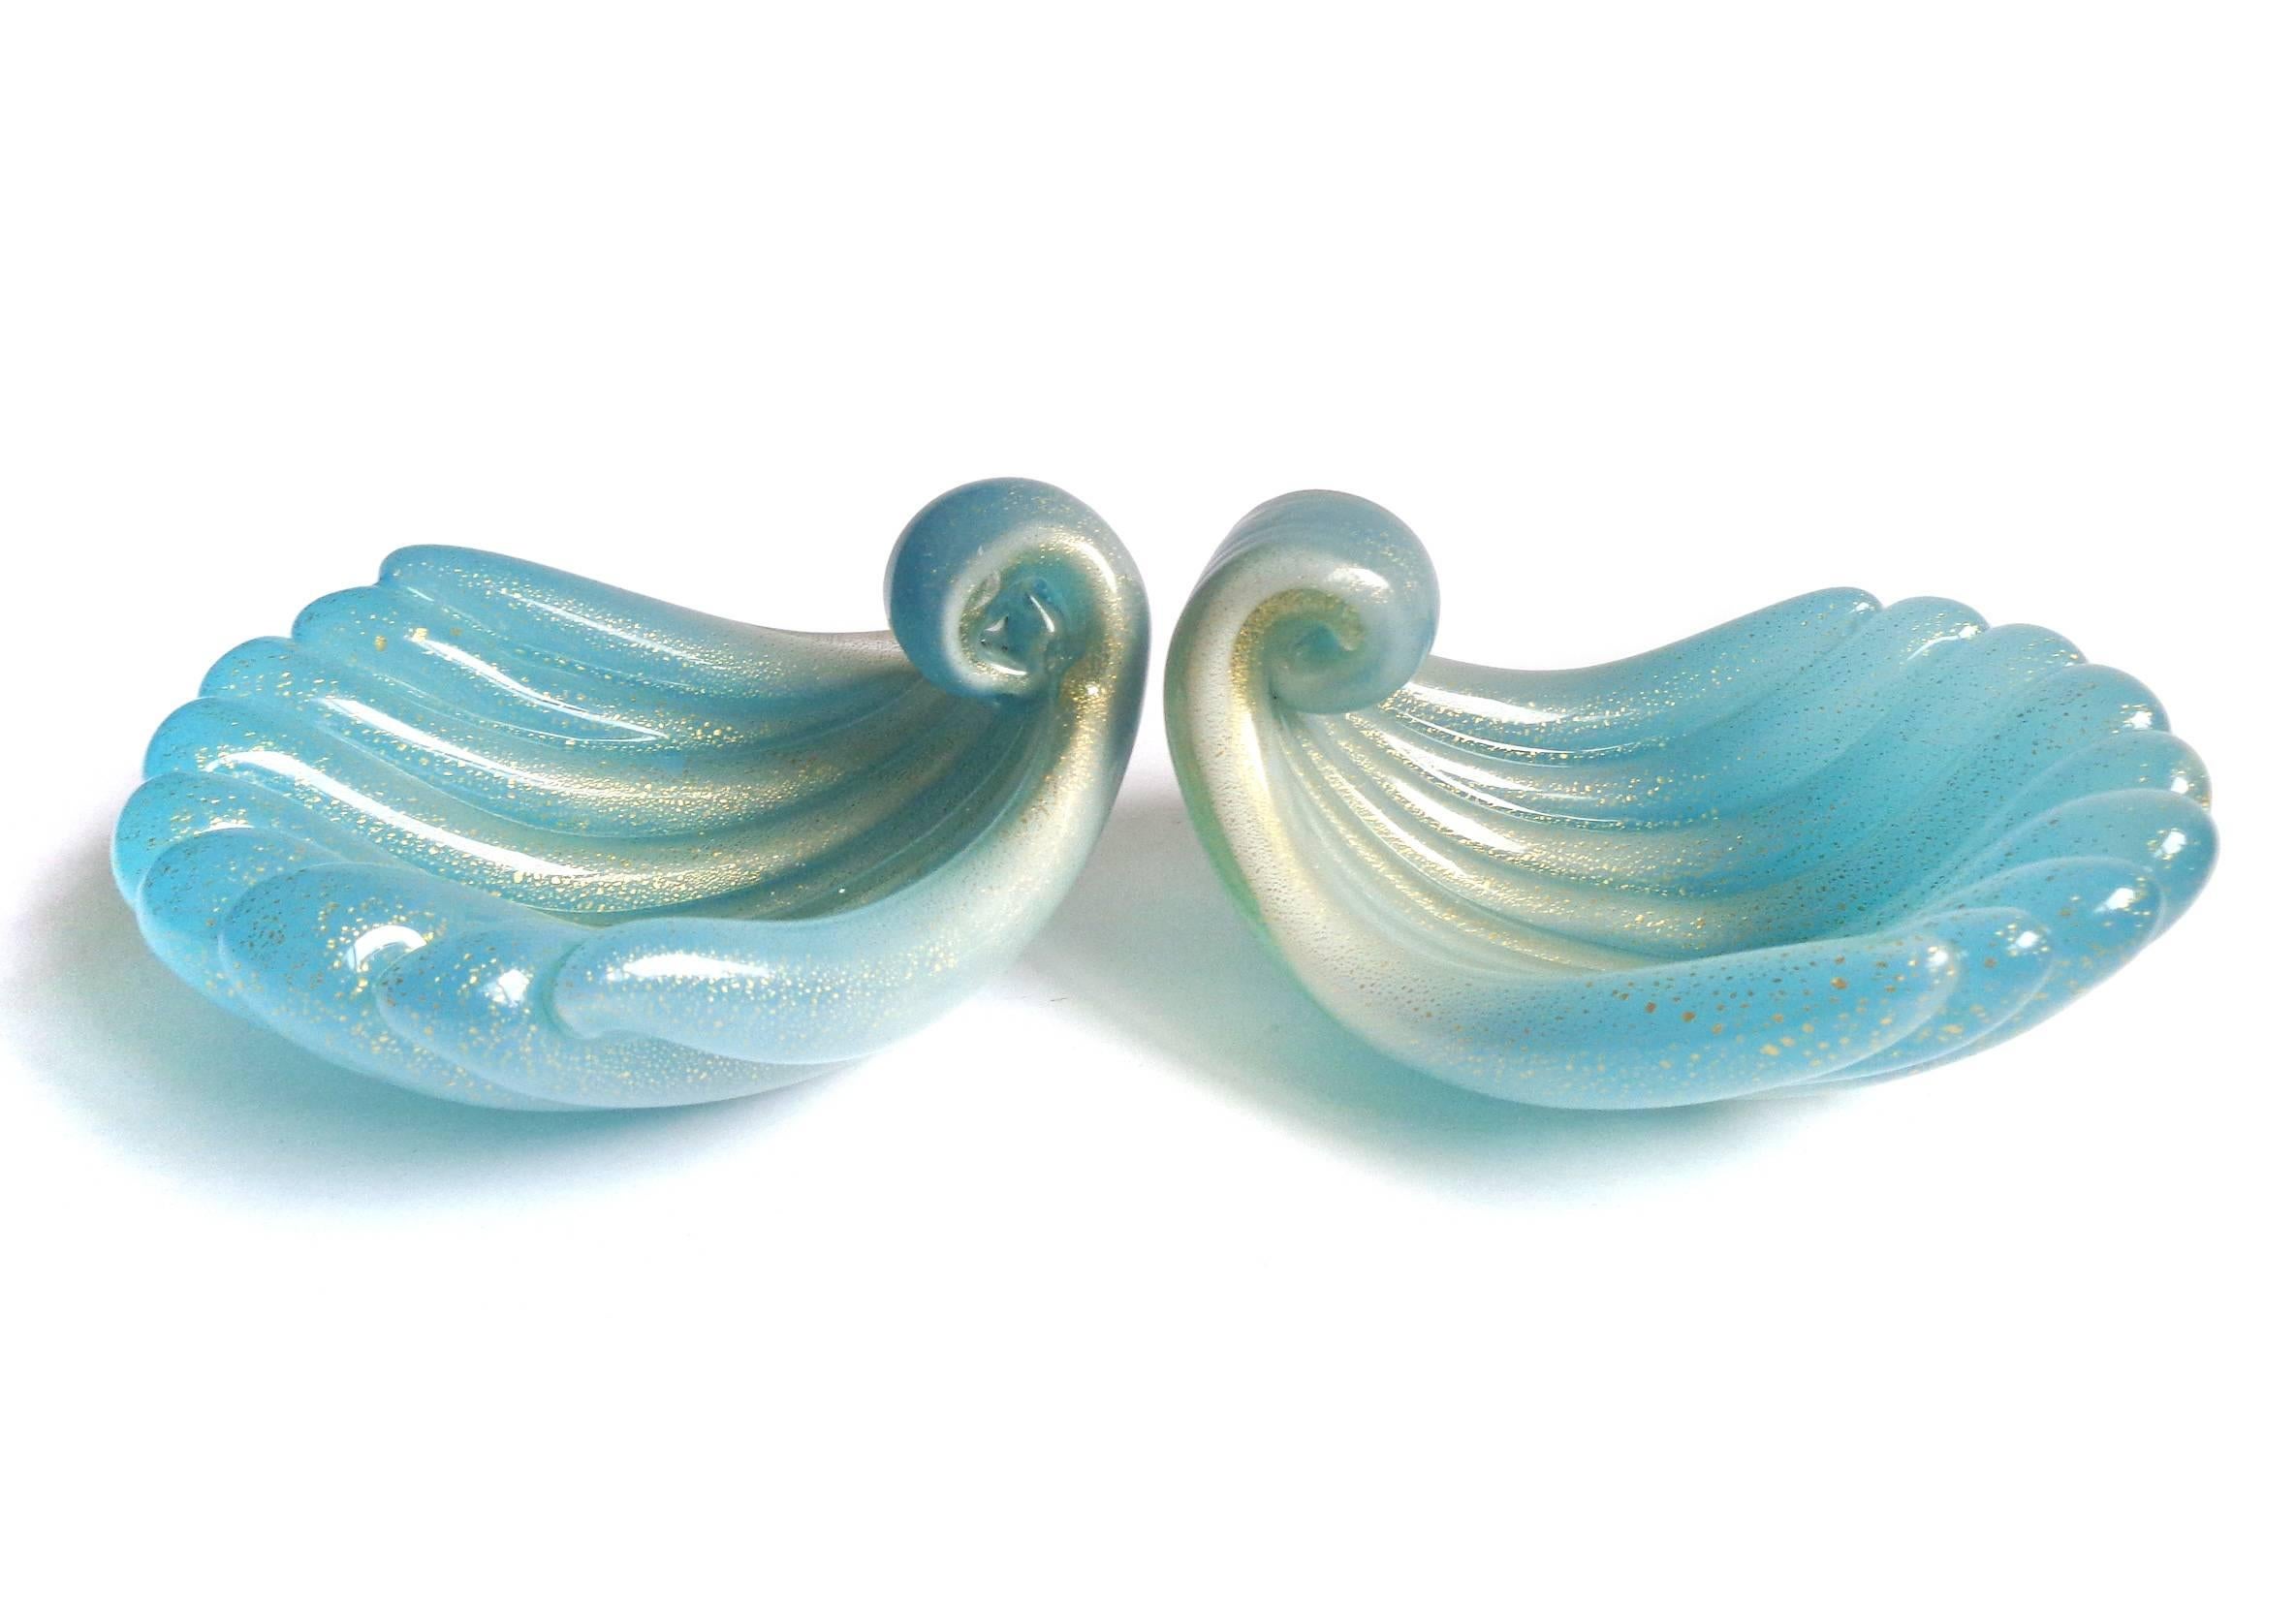 Free shipping worldwide! See details below description.

Gorgeous pair of Murano handblown opalescent blue and gold flecks art glass shell bowls. Documented to designer Archimede Seguso. Perfect for rings / earrings on any vanity or bedside table.